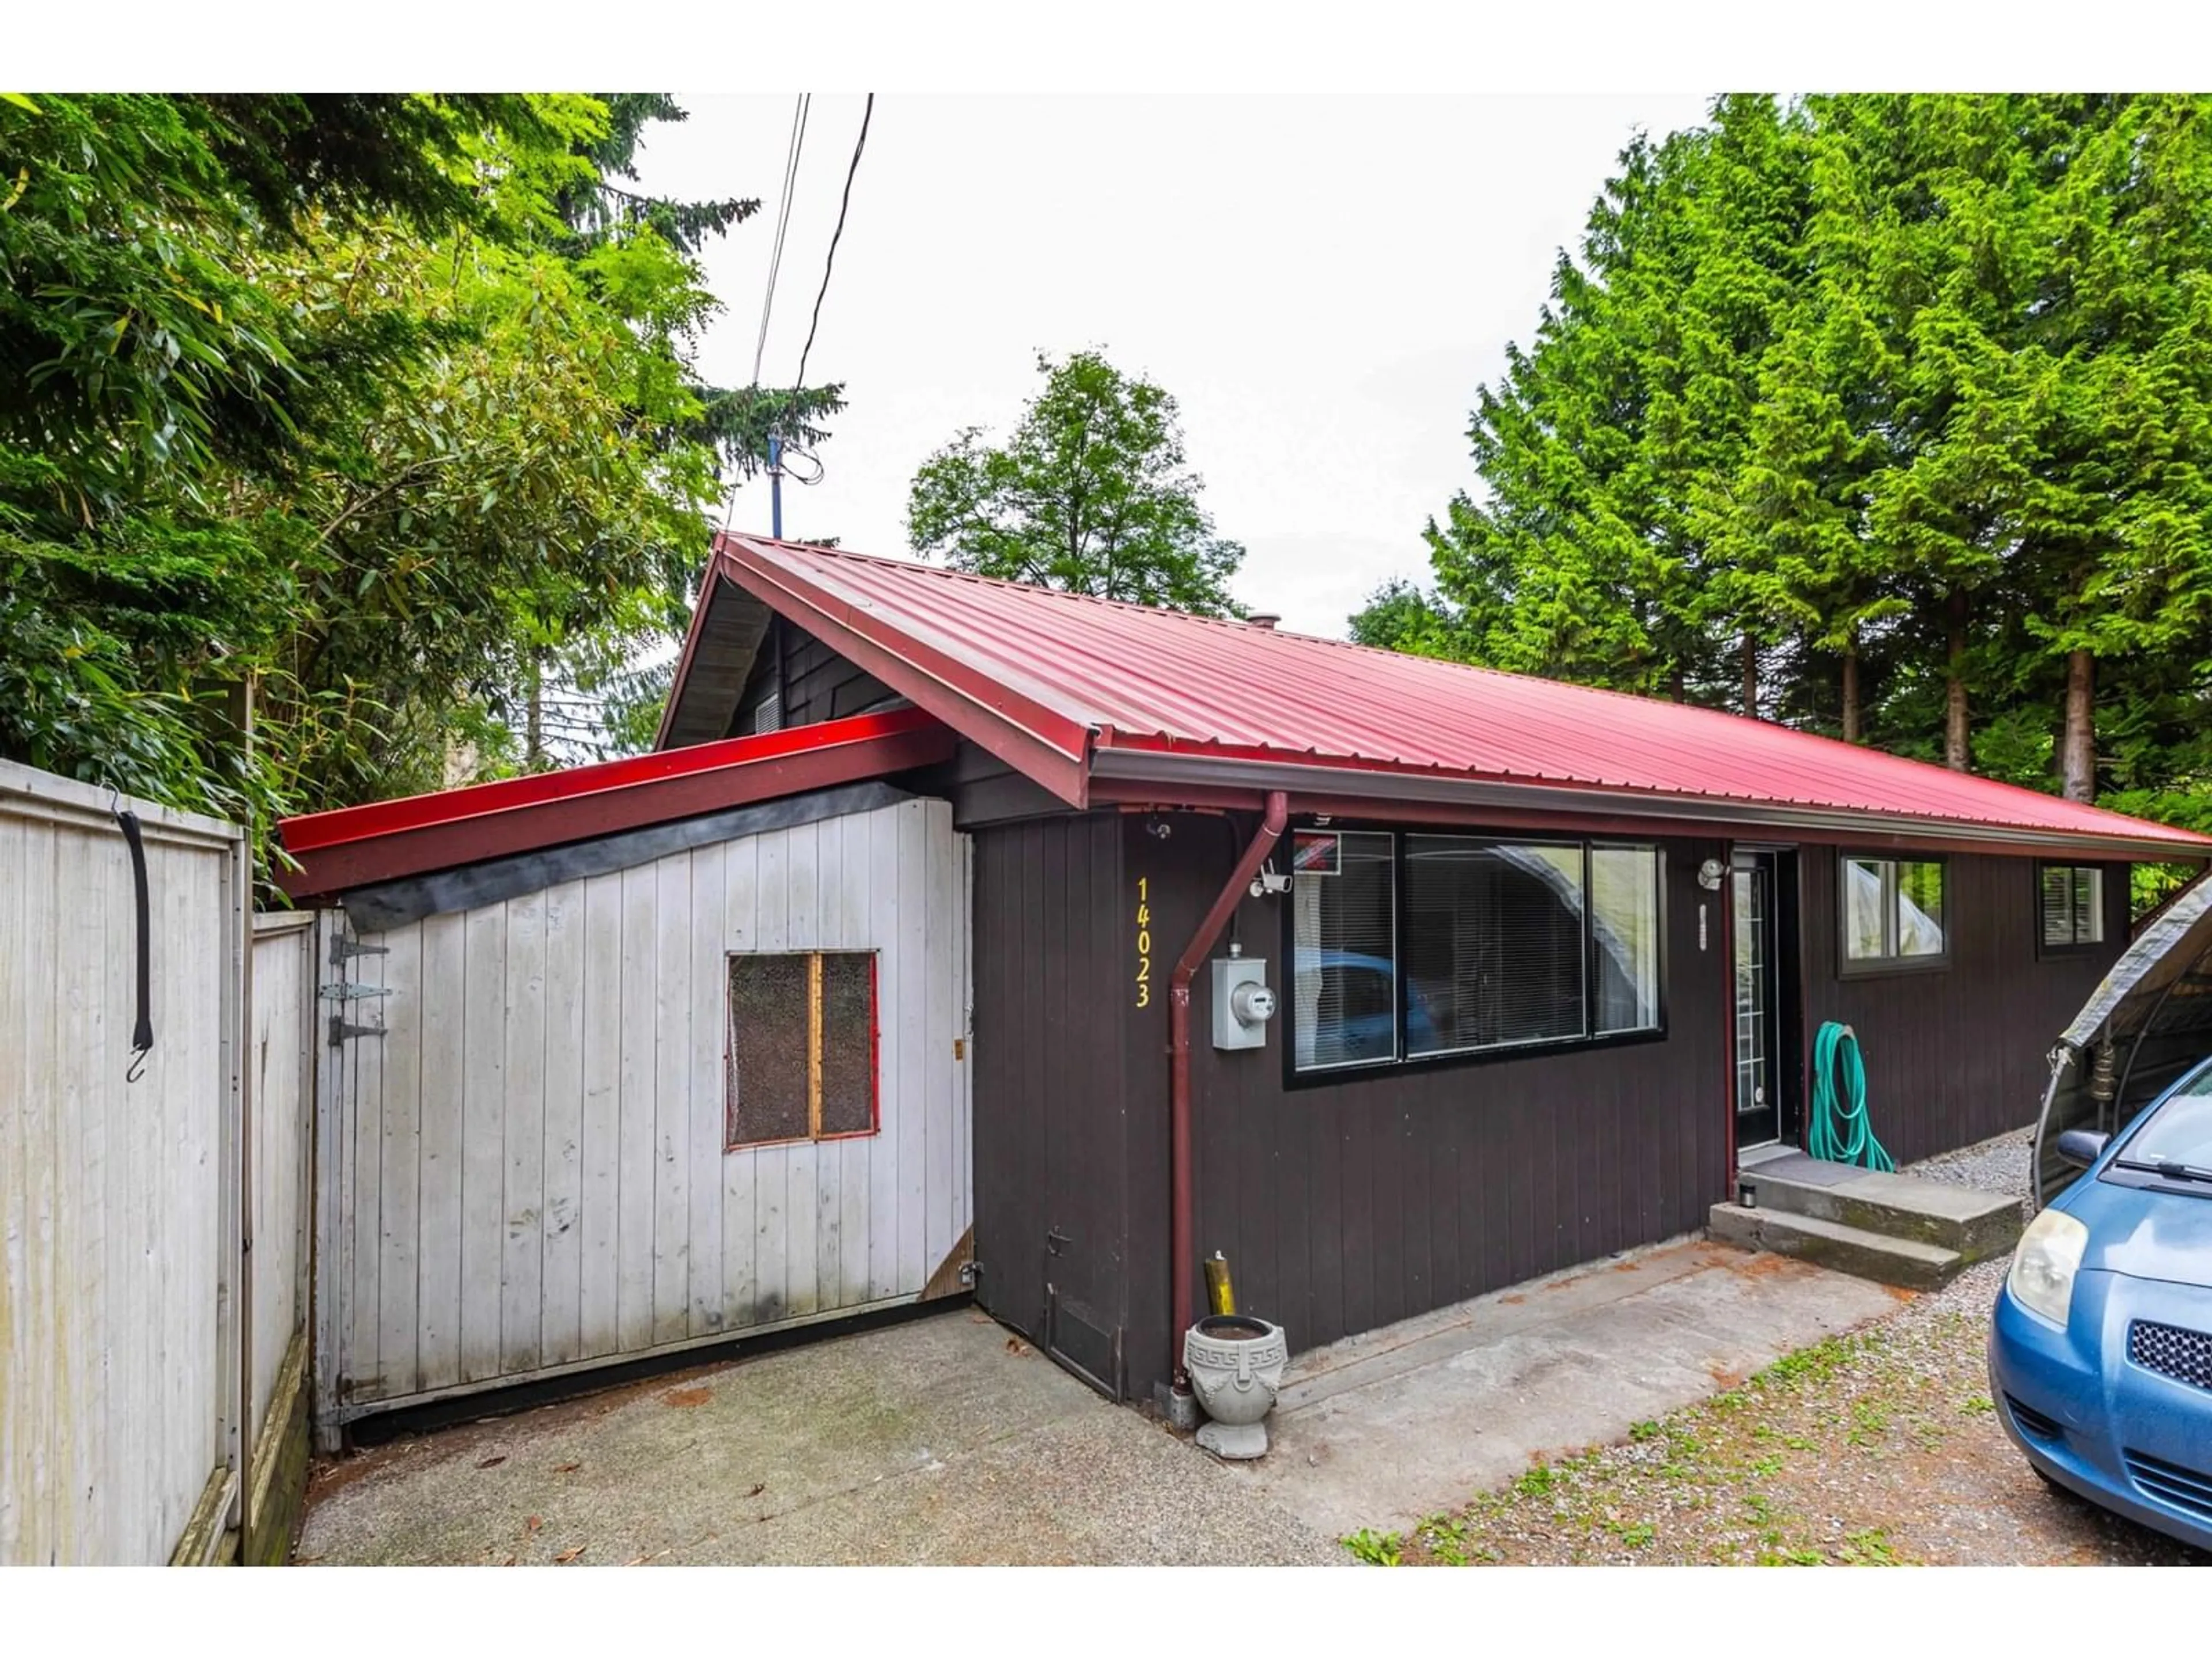 Shed for 14023 114 AVENUE, Surrey British Columbia V3R2M3